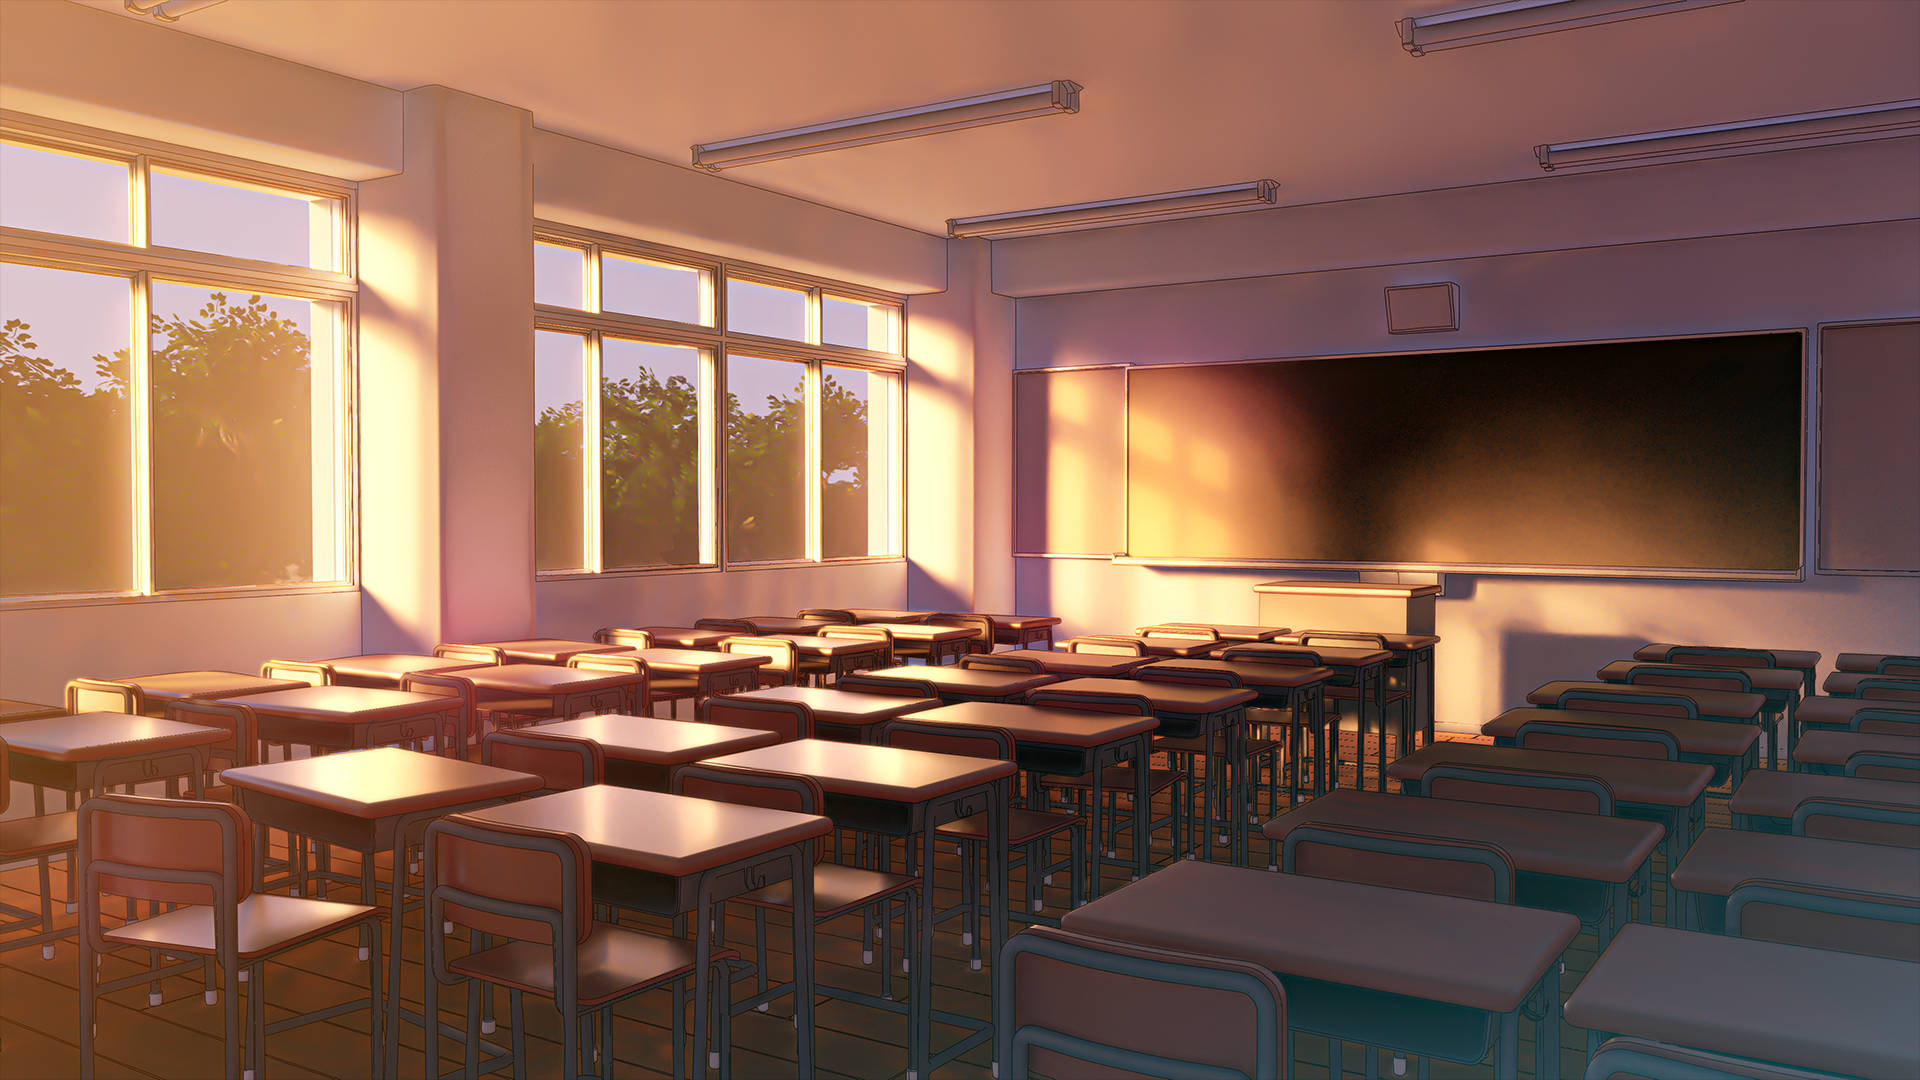 Spacey Anime Classroom Wallpaper